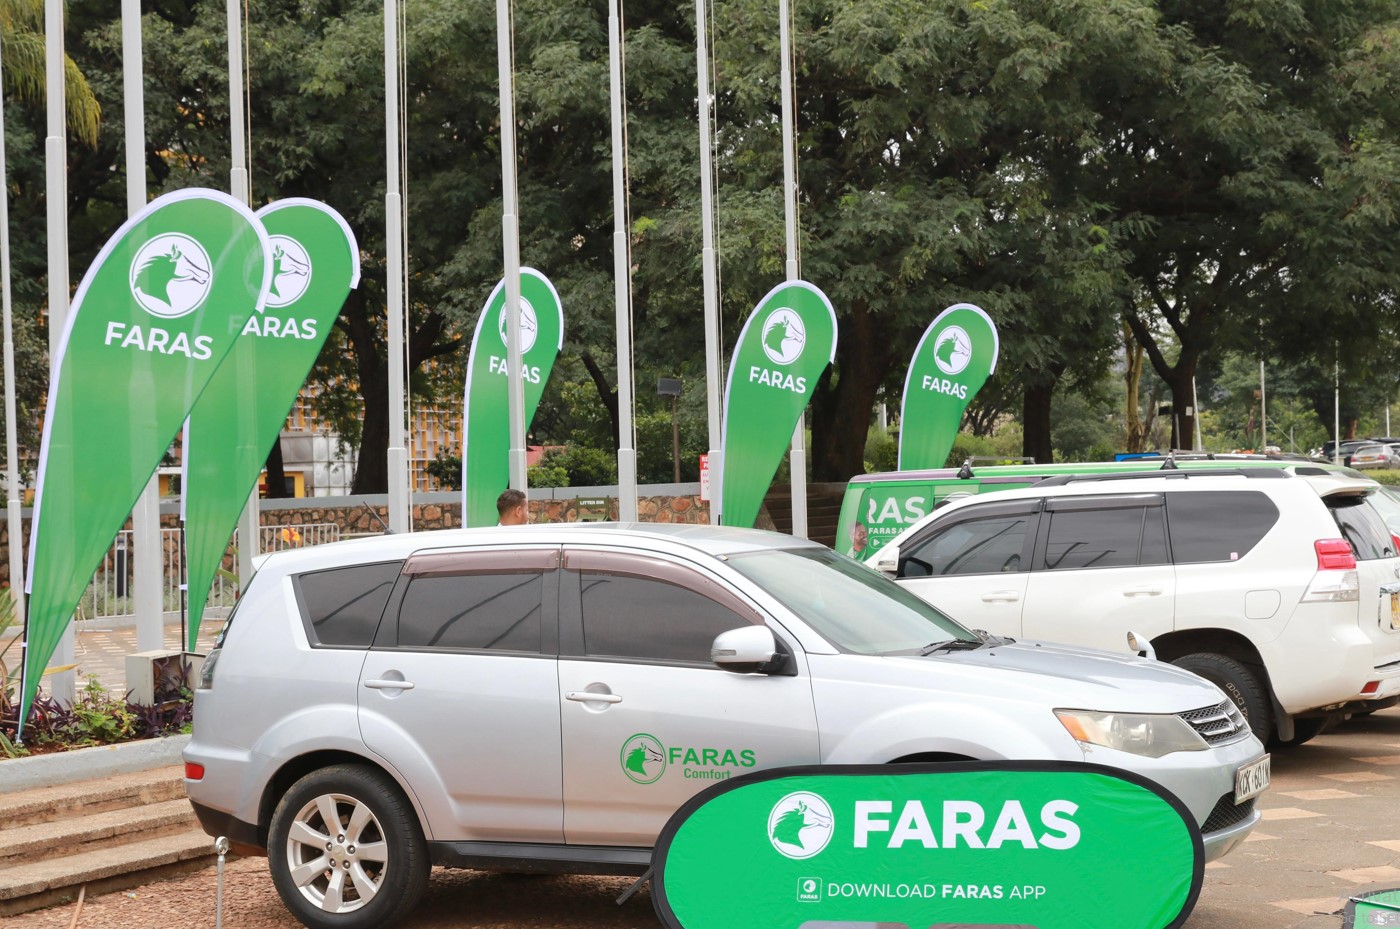 Faras Kenya launches 'luxury' taxi service targeting VIPs, corporates